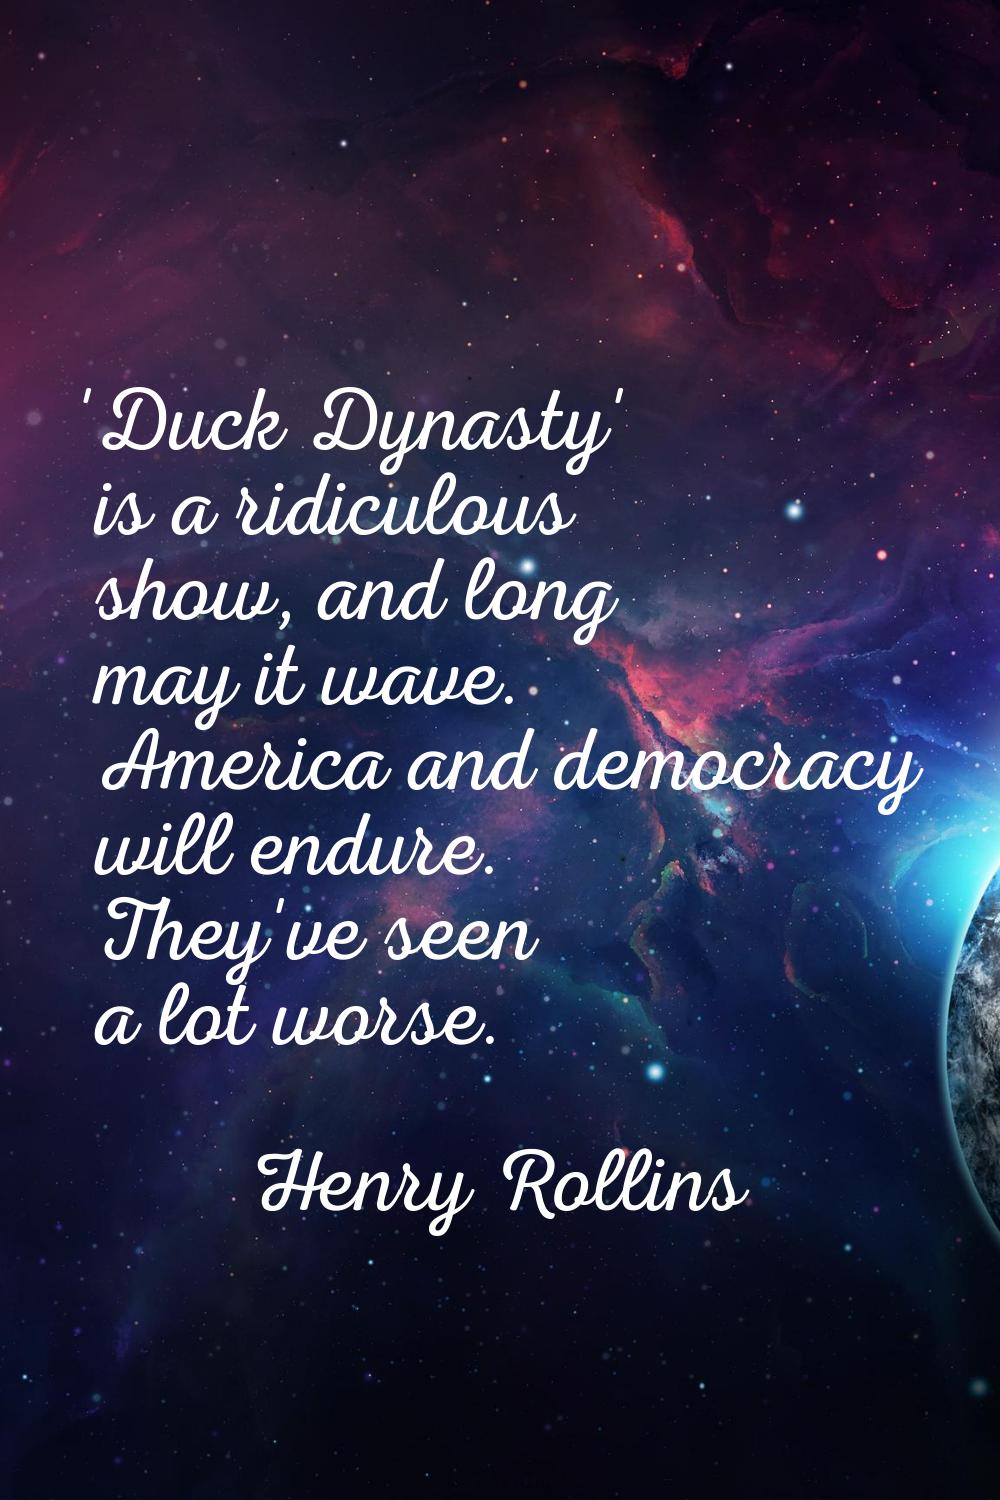 'Duck Dynasty' is a ridiculous show, and long may it wave. America and democracy will endure. They'